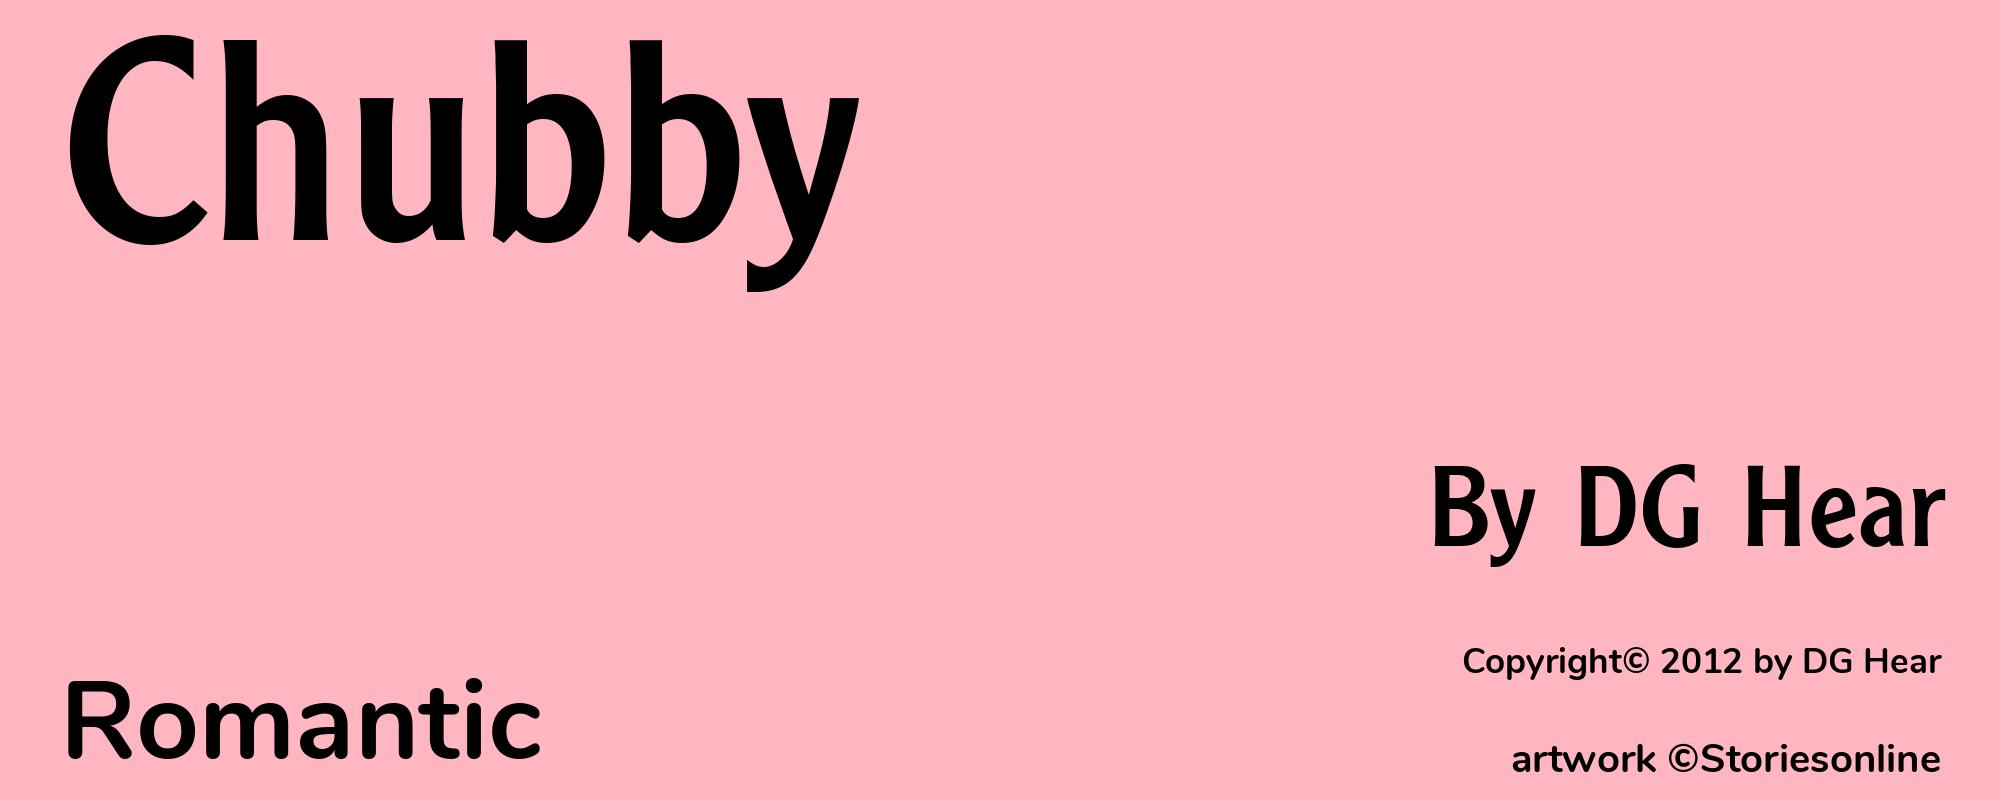 Chubby - Cover